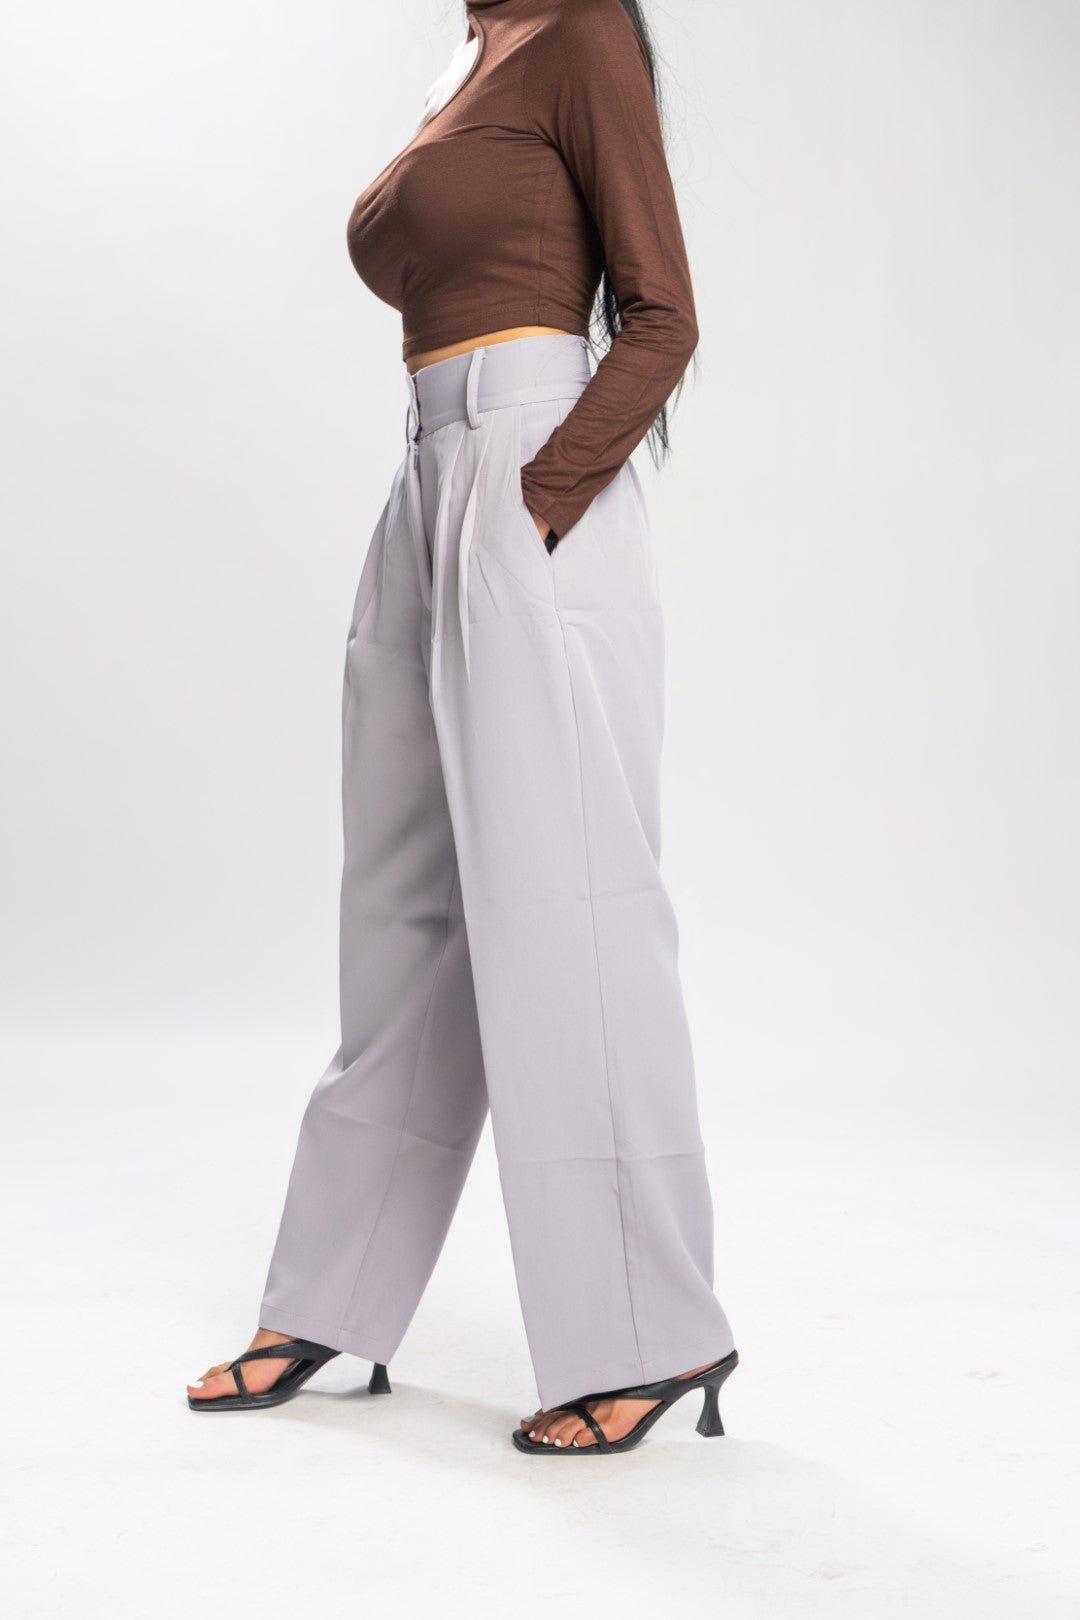 Buy Baggy Pants for Women Online from India's Luxury Designers 2023